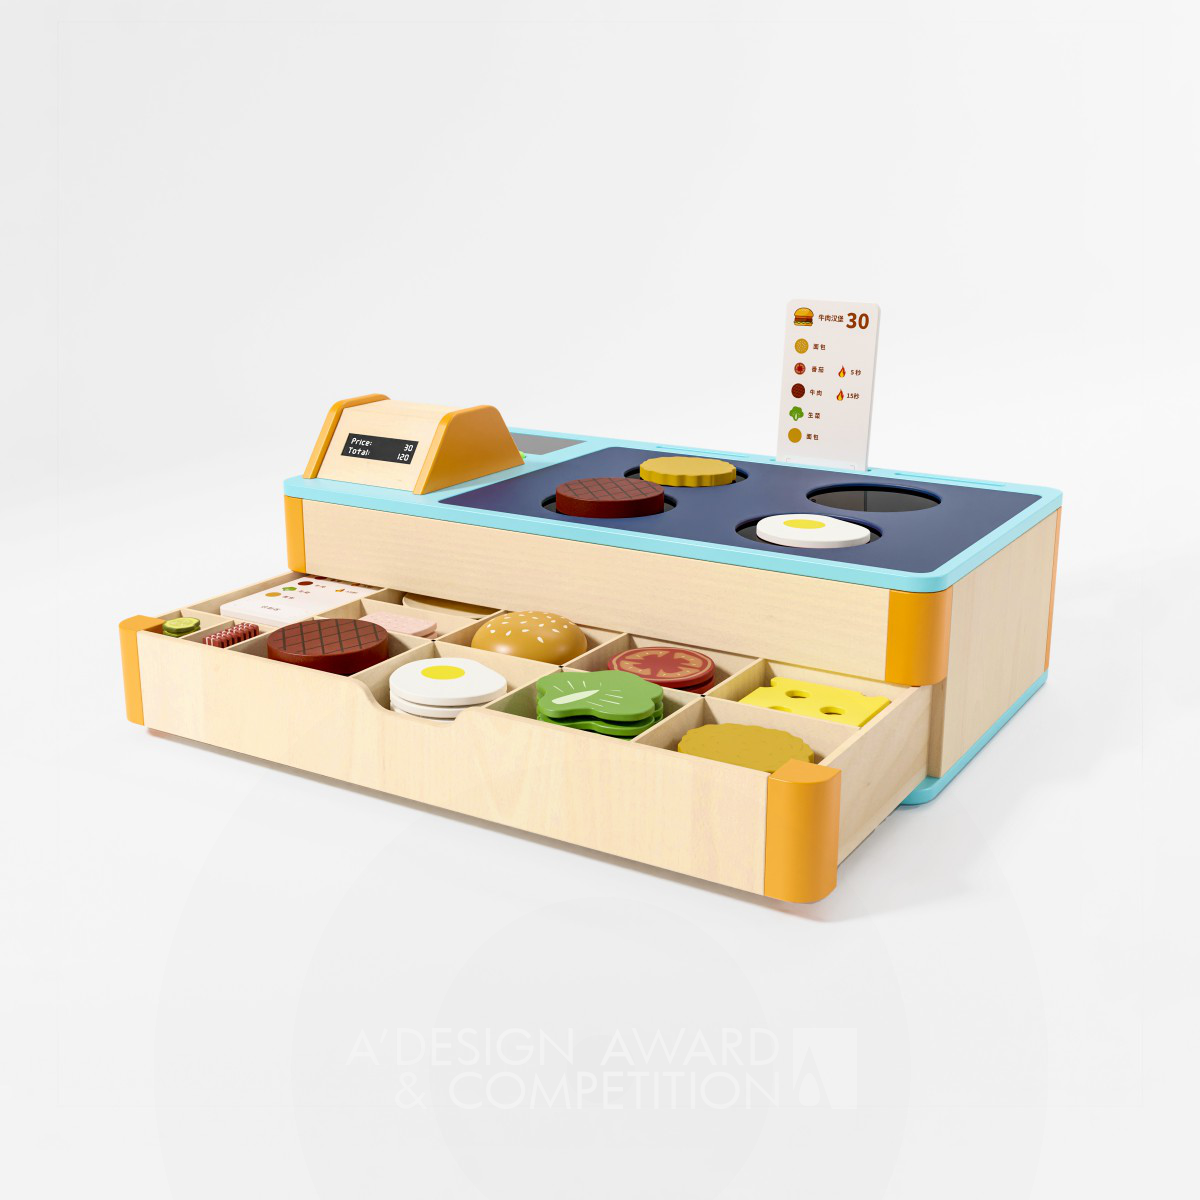 Yummy: A Unique Wooden Toy for Interactive Restaurant Simulation Play